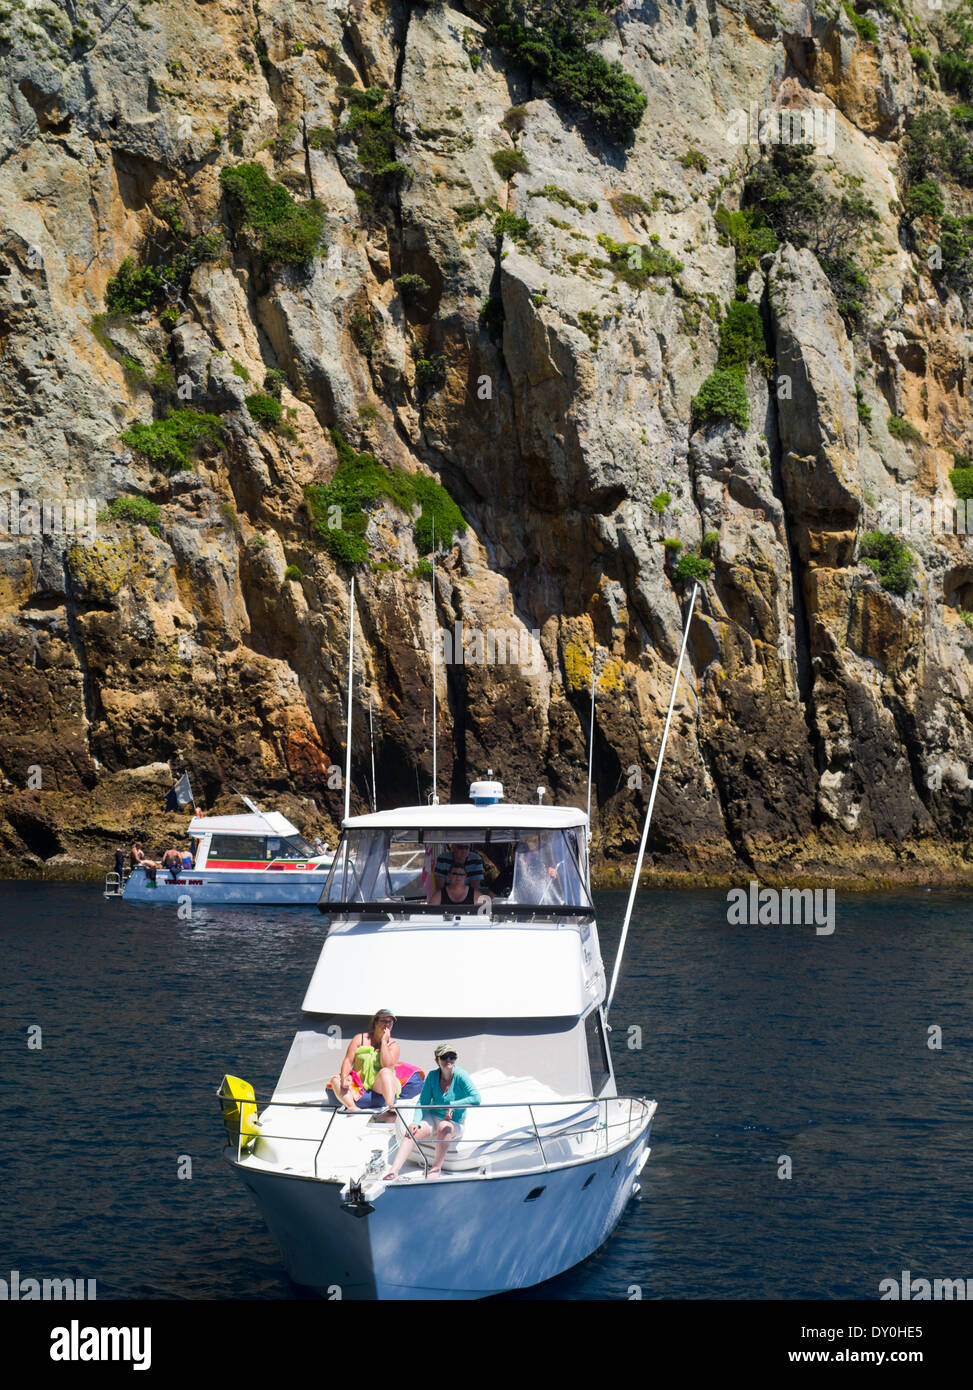 Boaters enjoy a relaxing day at Poor Knights Islands, summer, Northland, New Zealand Stock Photo